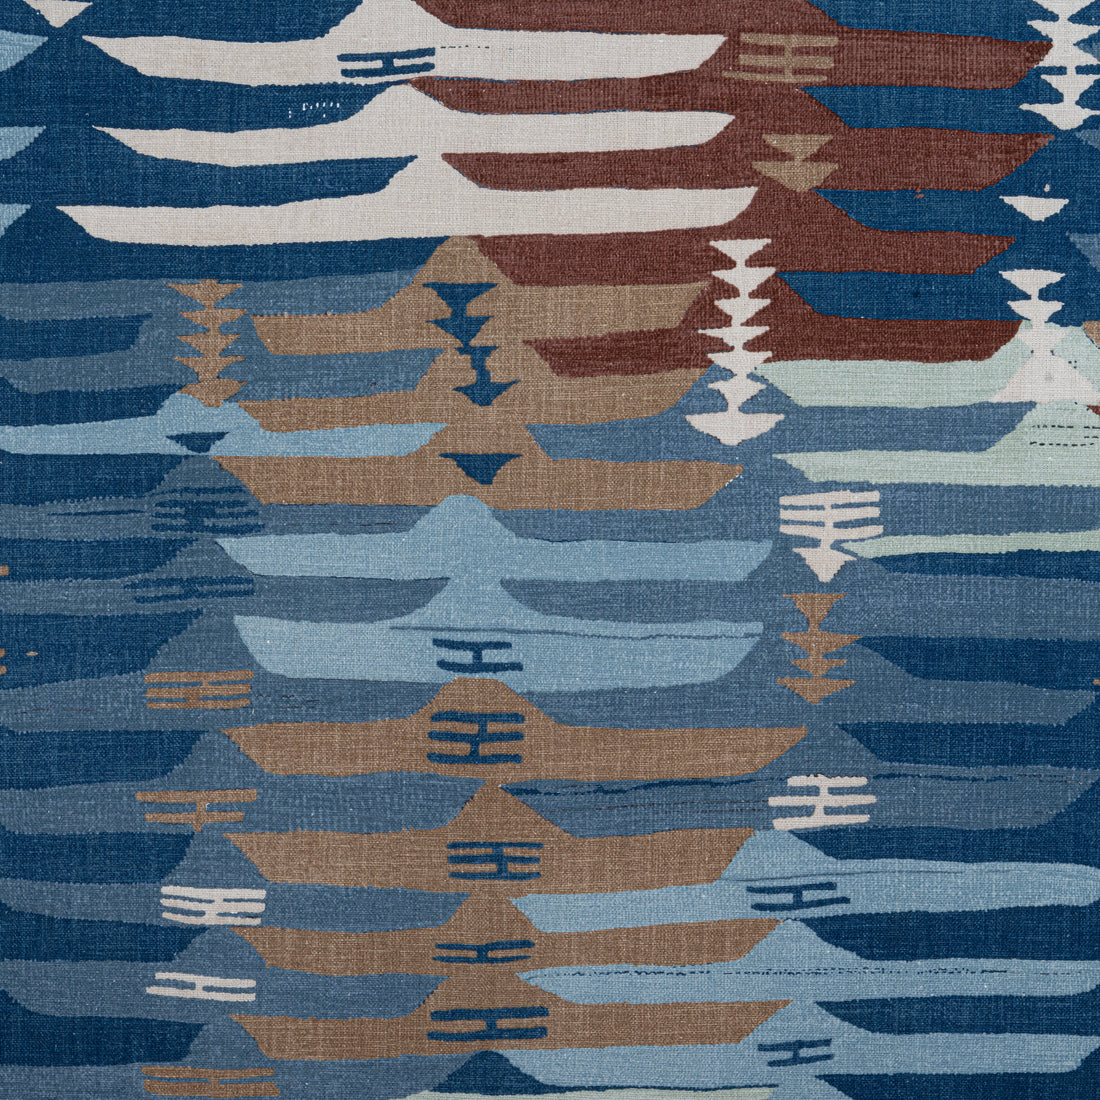 Rio Grande fabric in navy and brown color - pattern number F913210 - by Thibaut in the Mesa collection